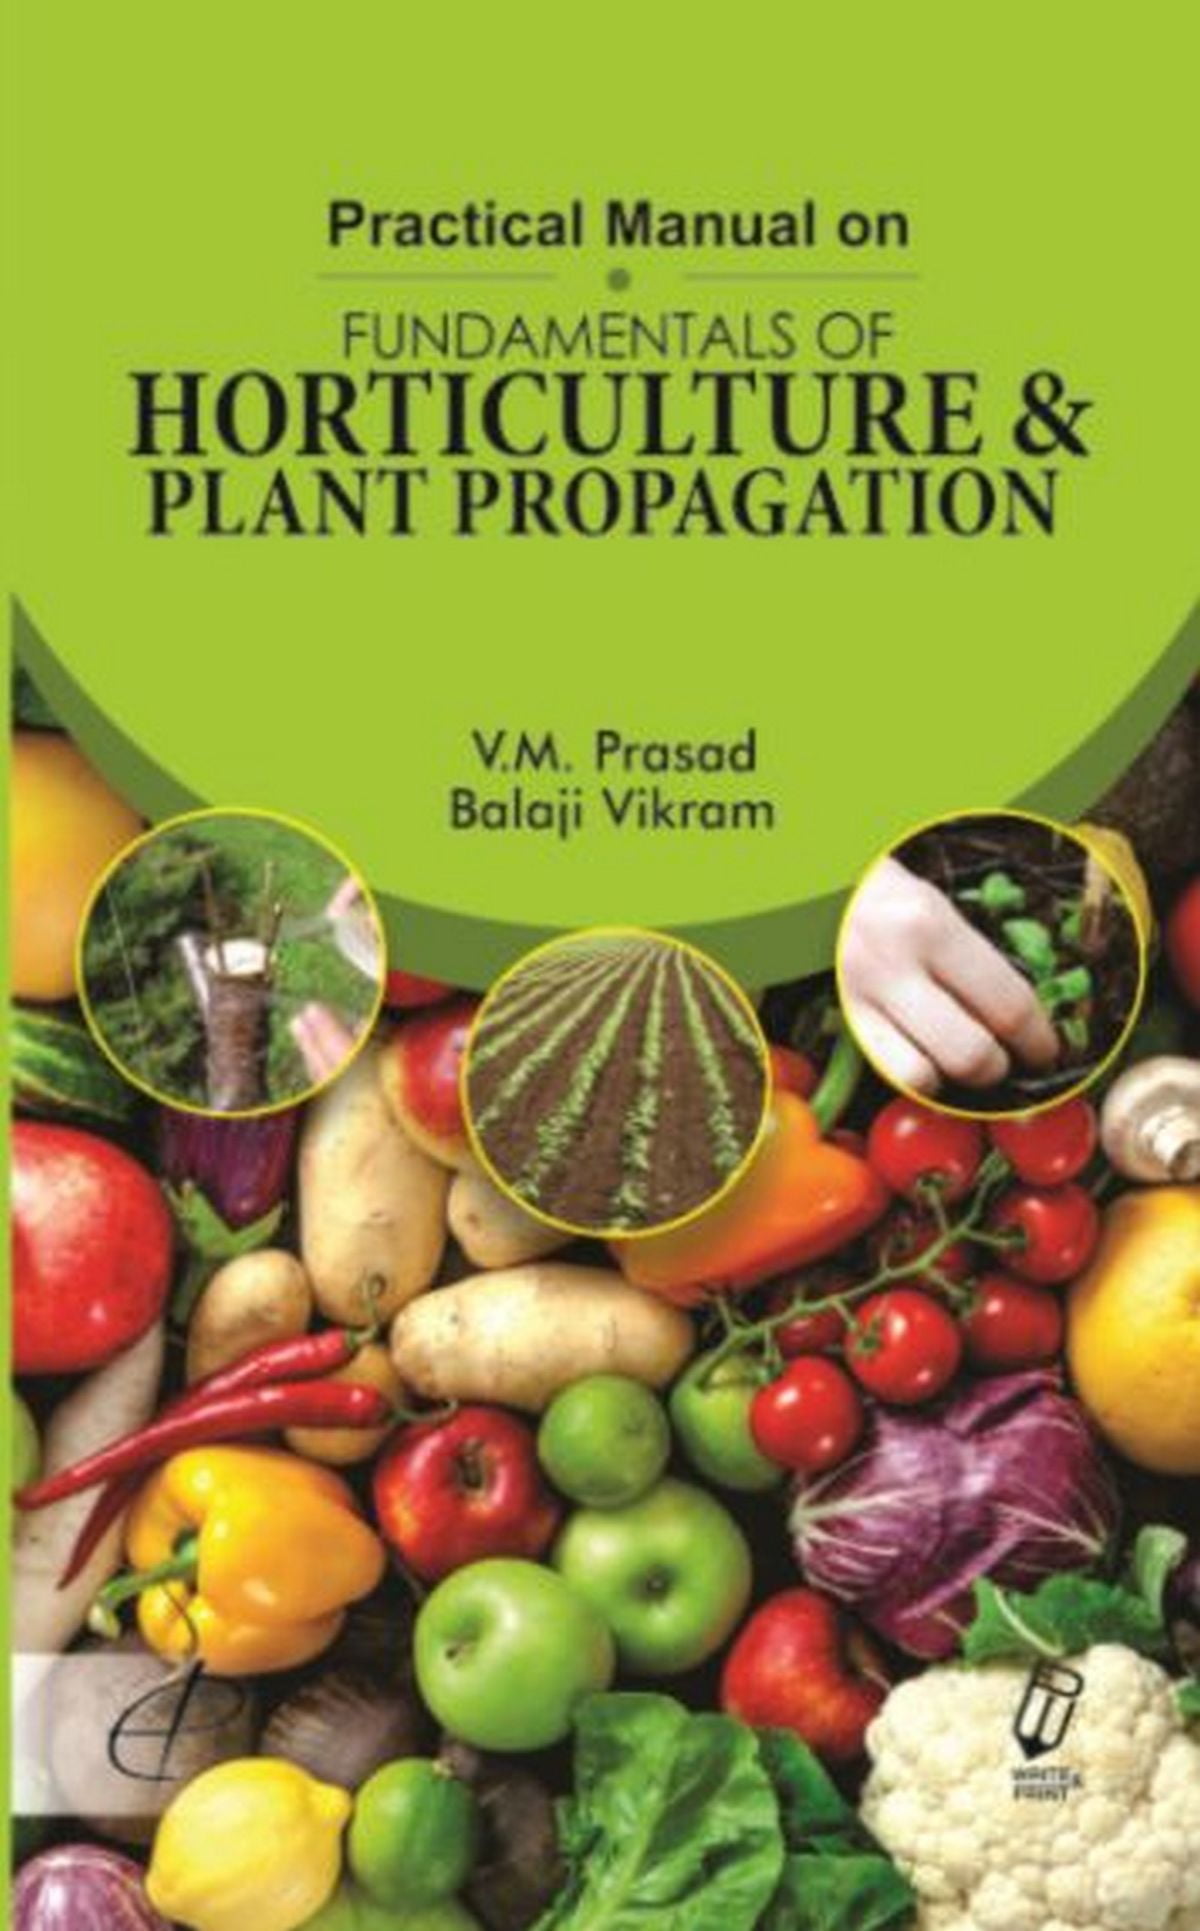 dissertation ideas for horticulture